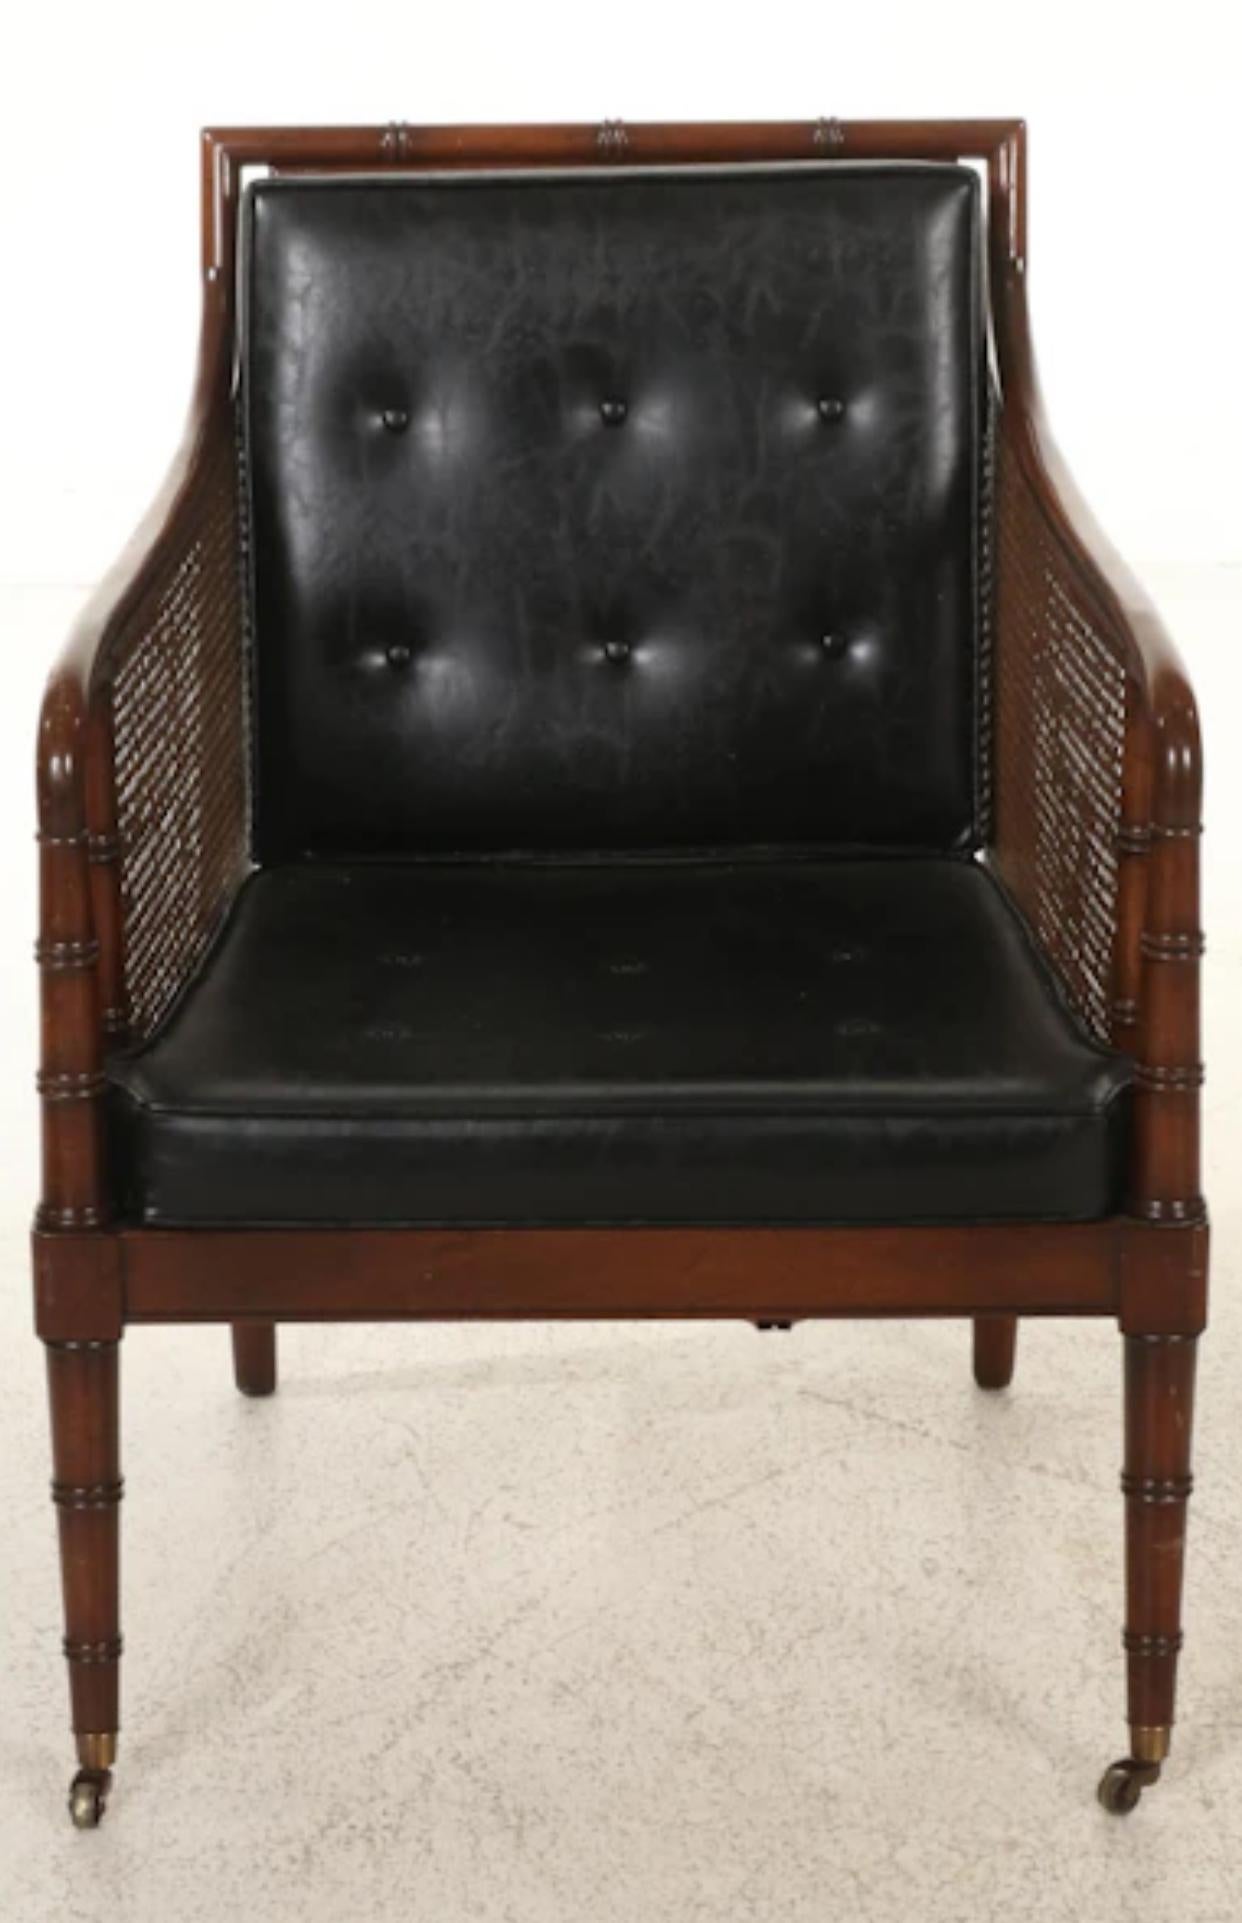 Hickory Chair Furniture Company  campaign style walnut regency faux bamboo  armchair and ottoman. Upholstered in black faux leather that has aged perfectly with minimal signs of wear. The cane back and sides are also in nicely aged appearance with